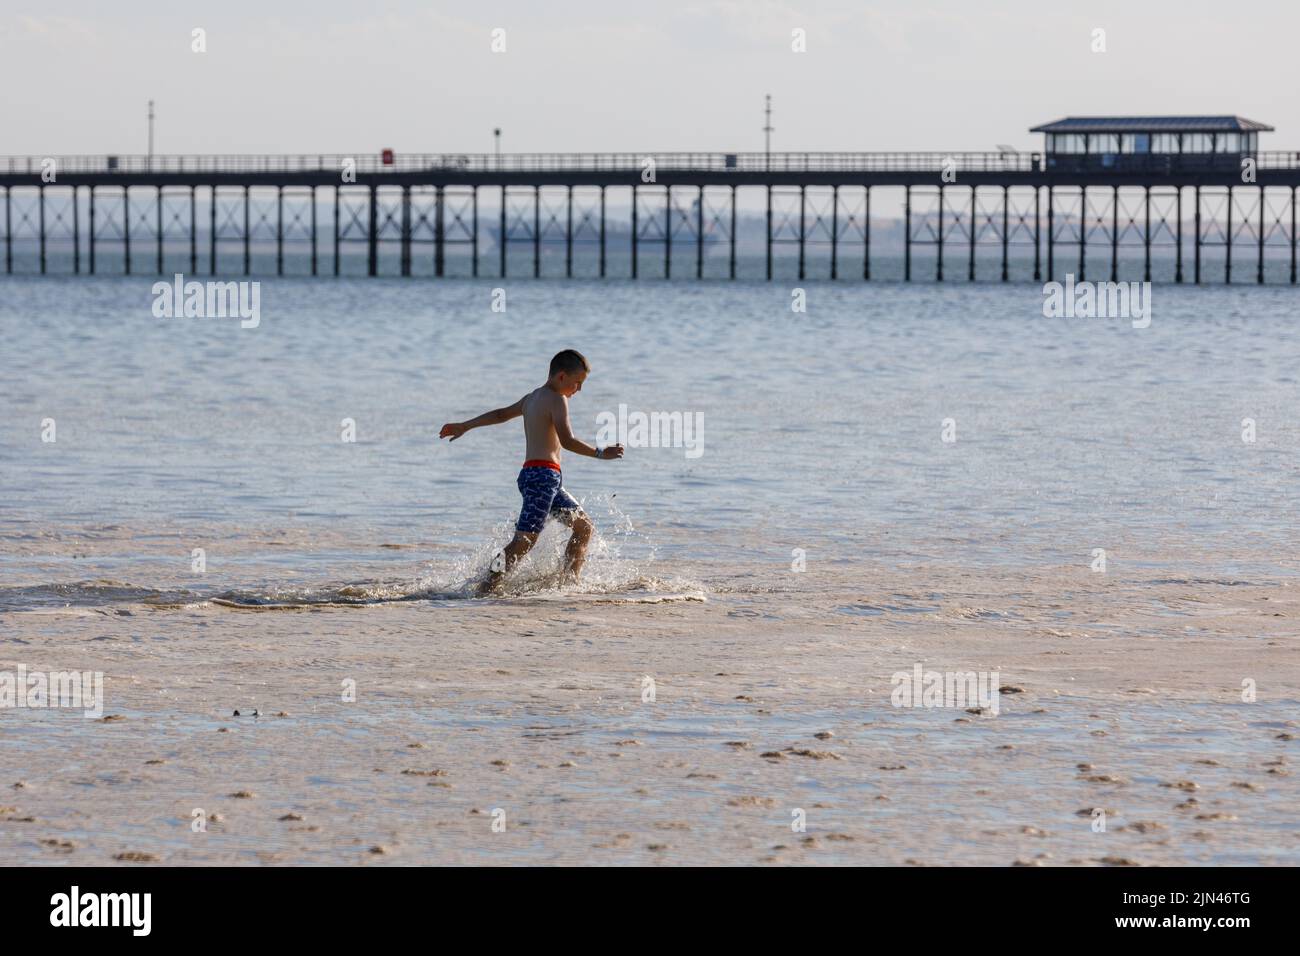 A boy runs in sea foam pollution at the beach with Southend pier in the background. Stock Photo